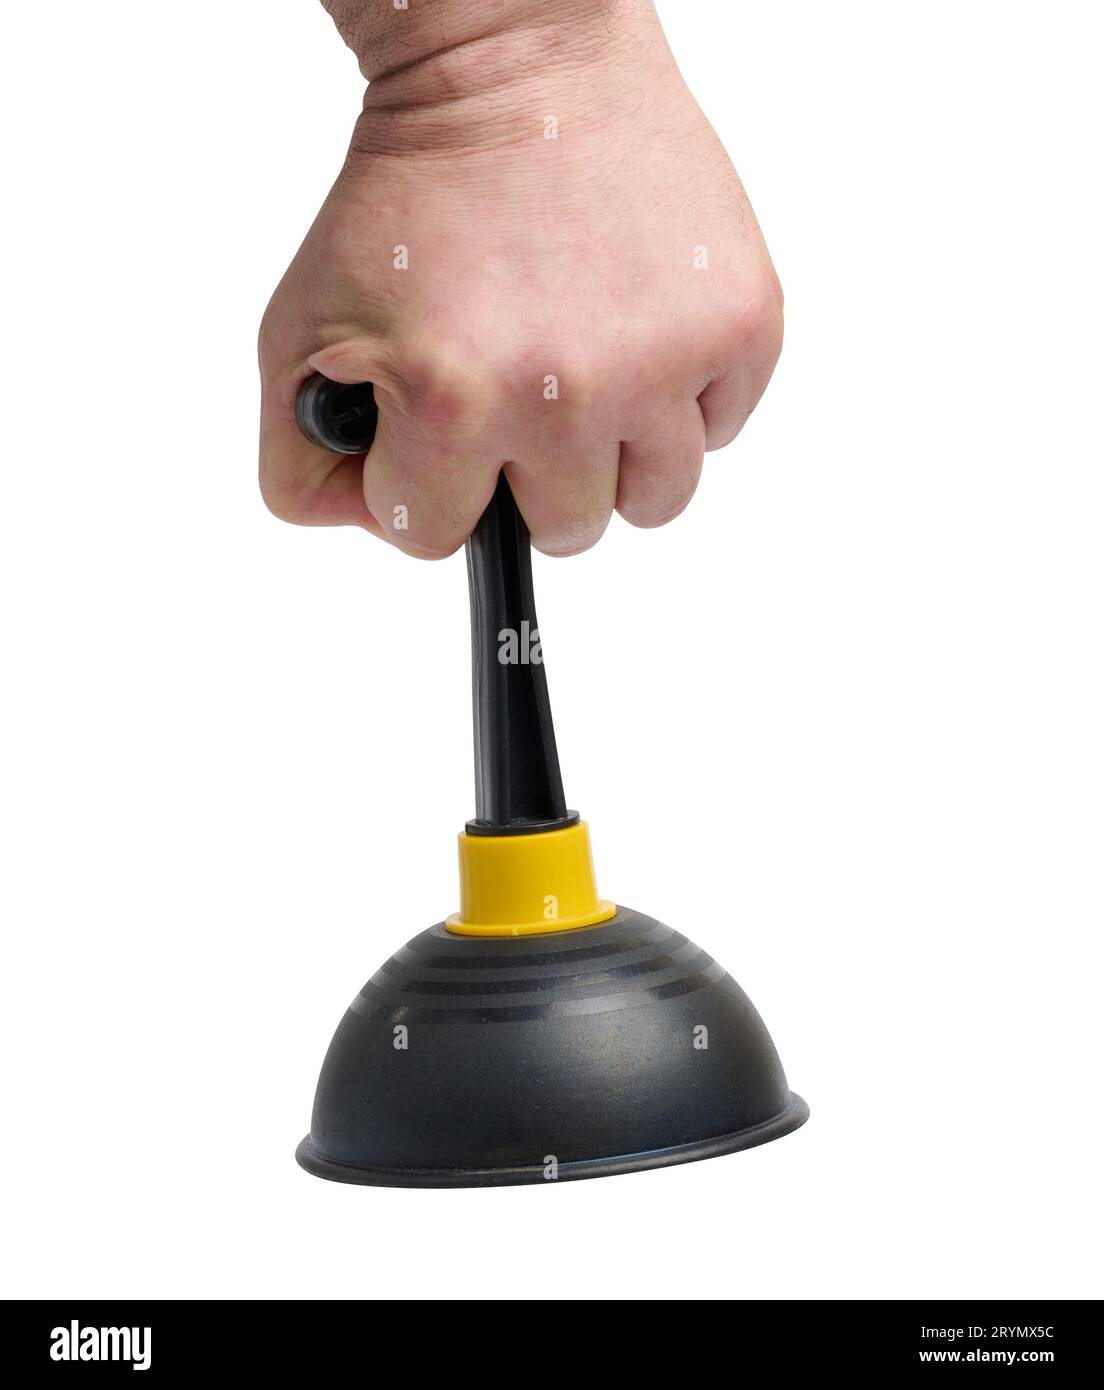 https://c8.alamy.com/comp/2RYMX5C/black-rubber-plunger-in-a-male-hand-on-a-white-isolated-background-2RYMX5C.jpg